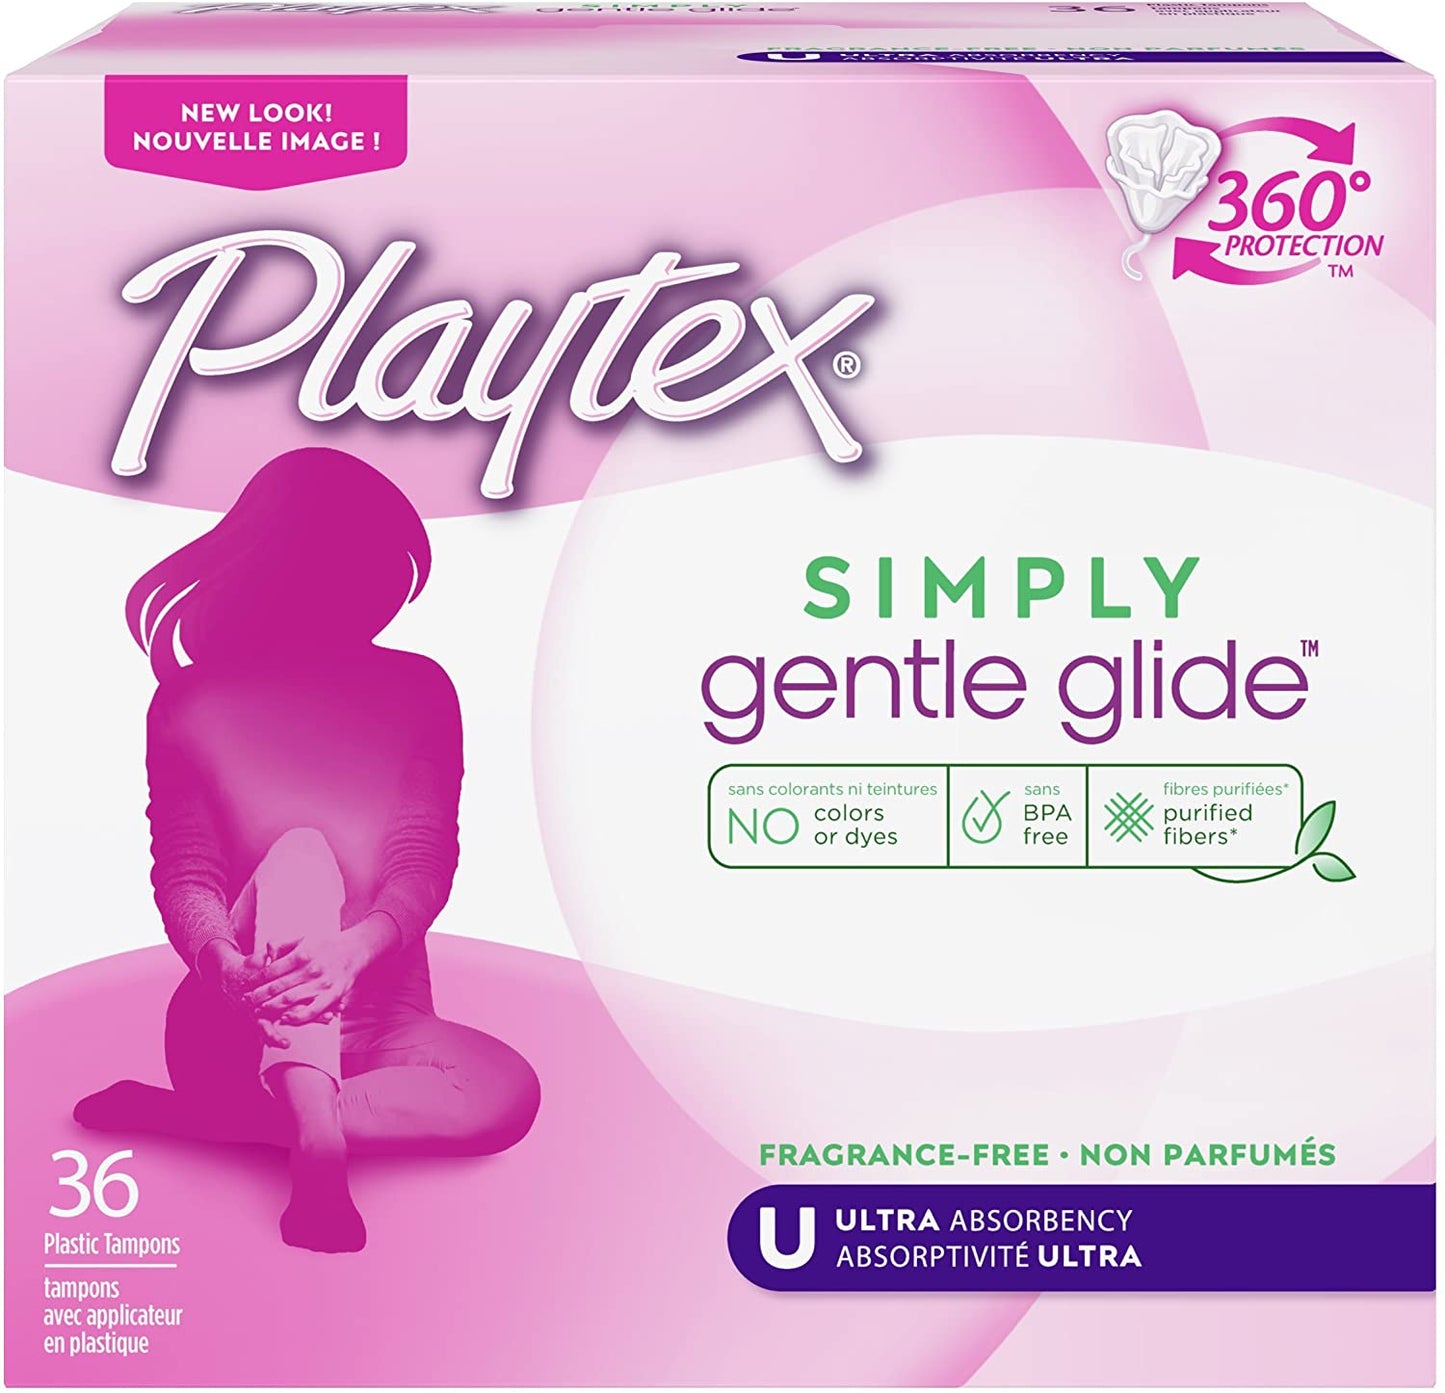 Playtex Simply Gentle Glide Unscented Tampons, Ultra Absorbency, 36 Count